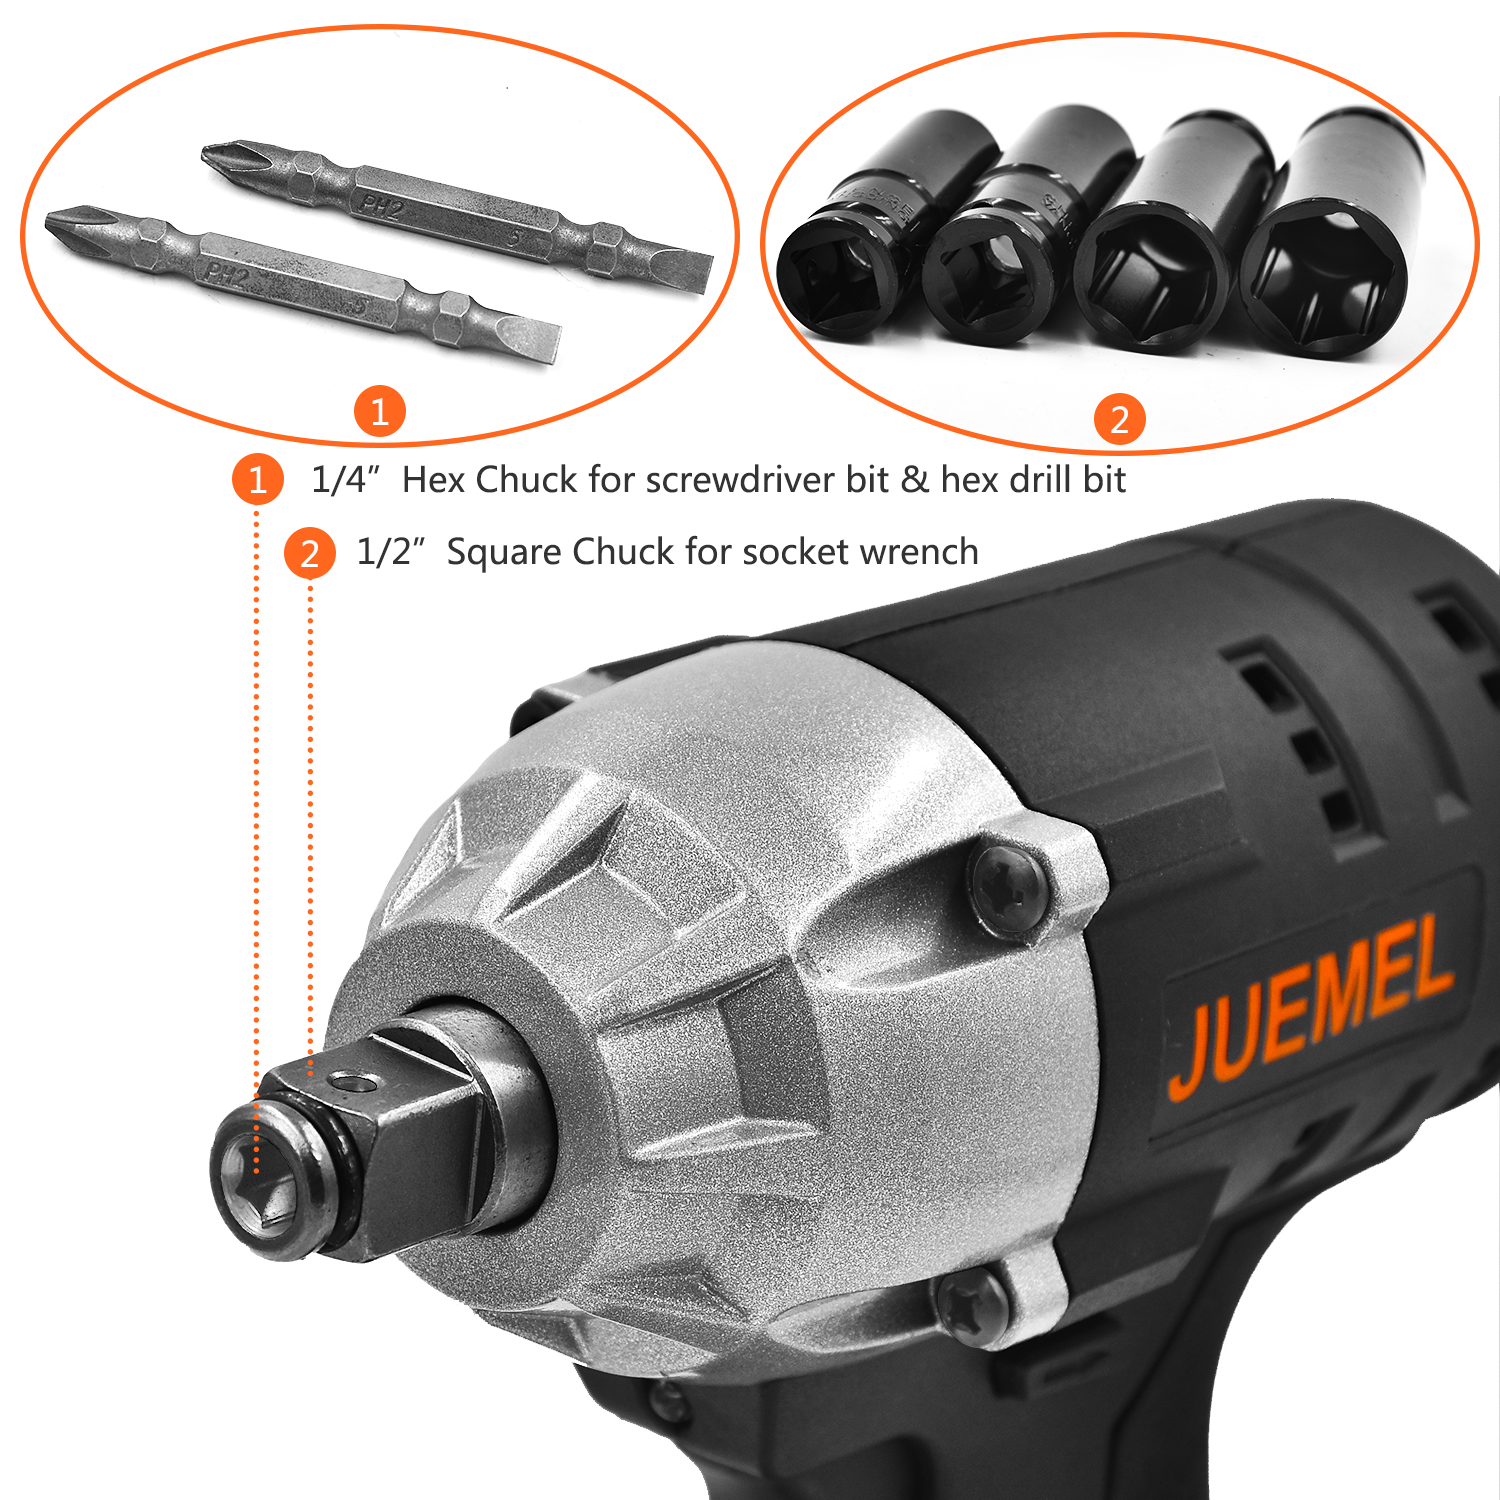 Cordless Impact Wrench, JUEMEL 20V Impact Driver 320N.m Torque, 4.0Ah Lithium Battery, 2-Speed/Brushless / 12.7mm and 6.35mm Chuck with 14 Accessories, Include Fast Charger, Carry Case